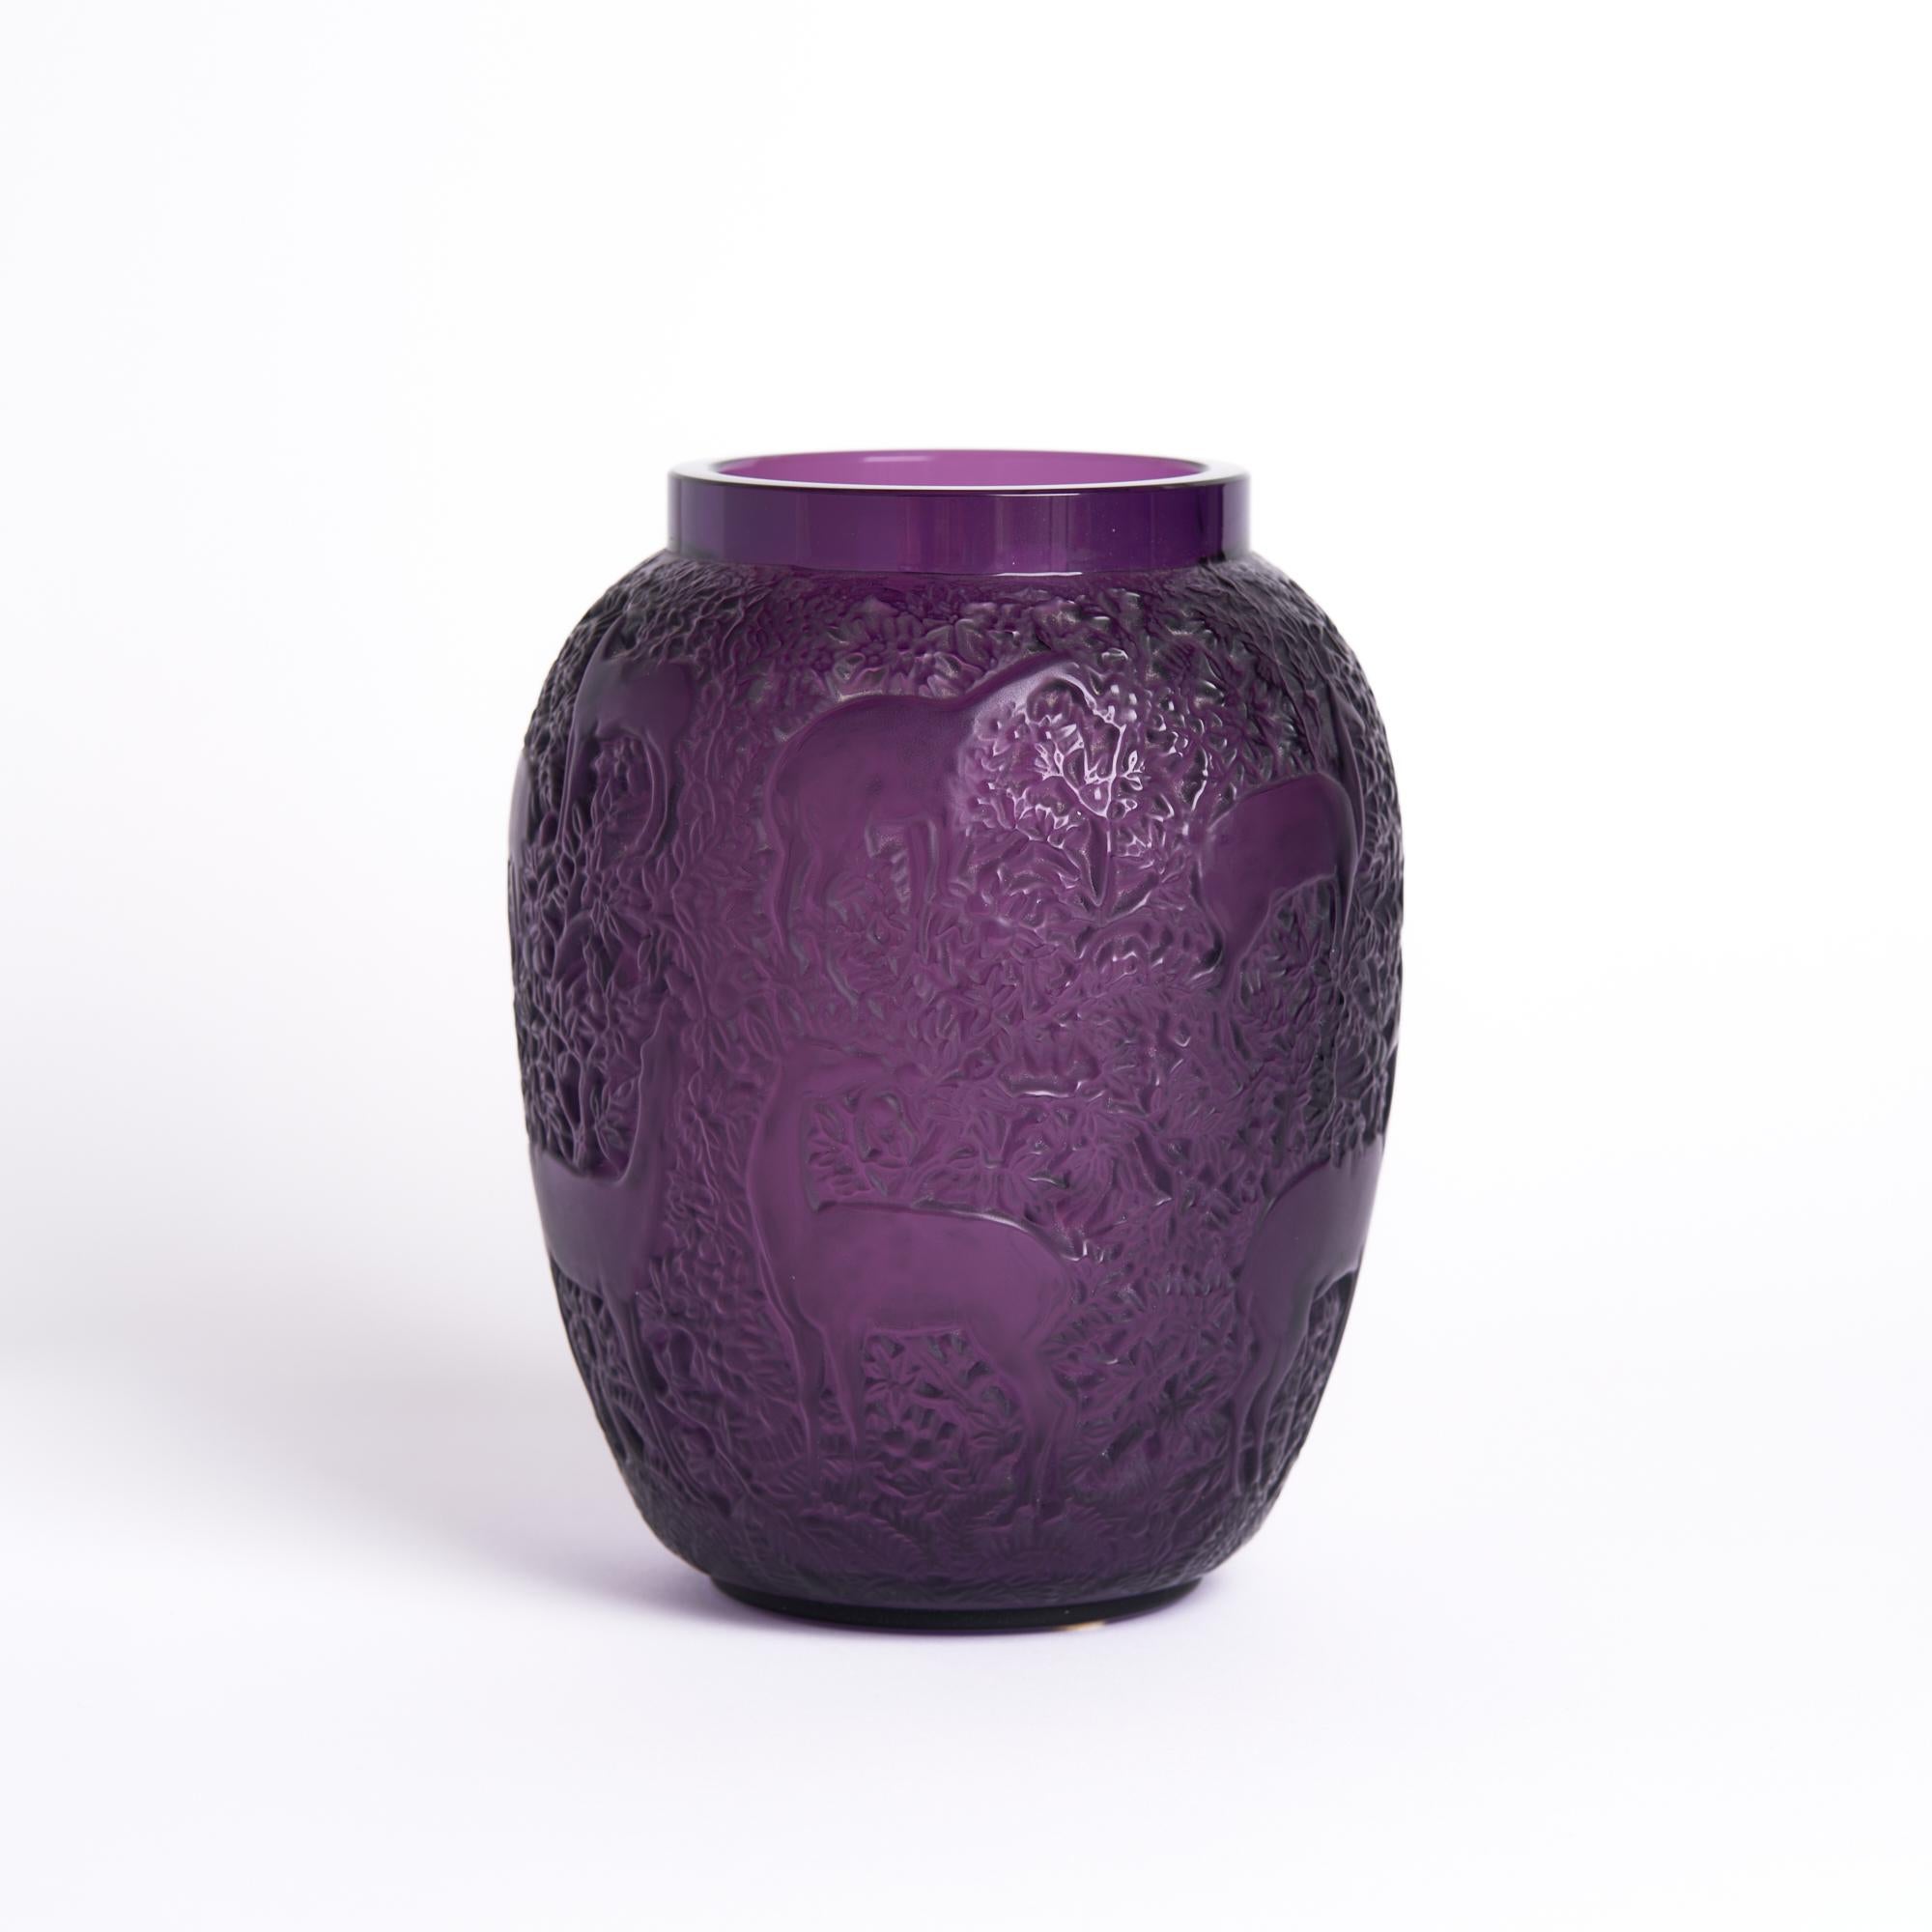 Lalique Purple Glass Biches Vase

This vase measures: 5.5 wide x 5.5 deep x 6.75 inches high and is in Great Vintage Condition

We take our photos in a controlled lighting studio to show as much detail as possible. We do not photoshop out